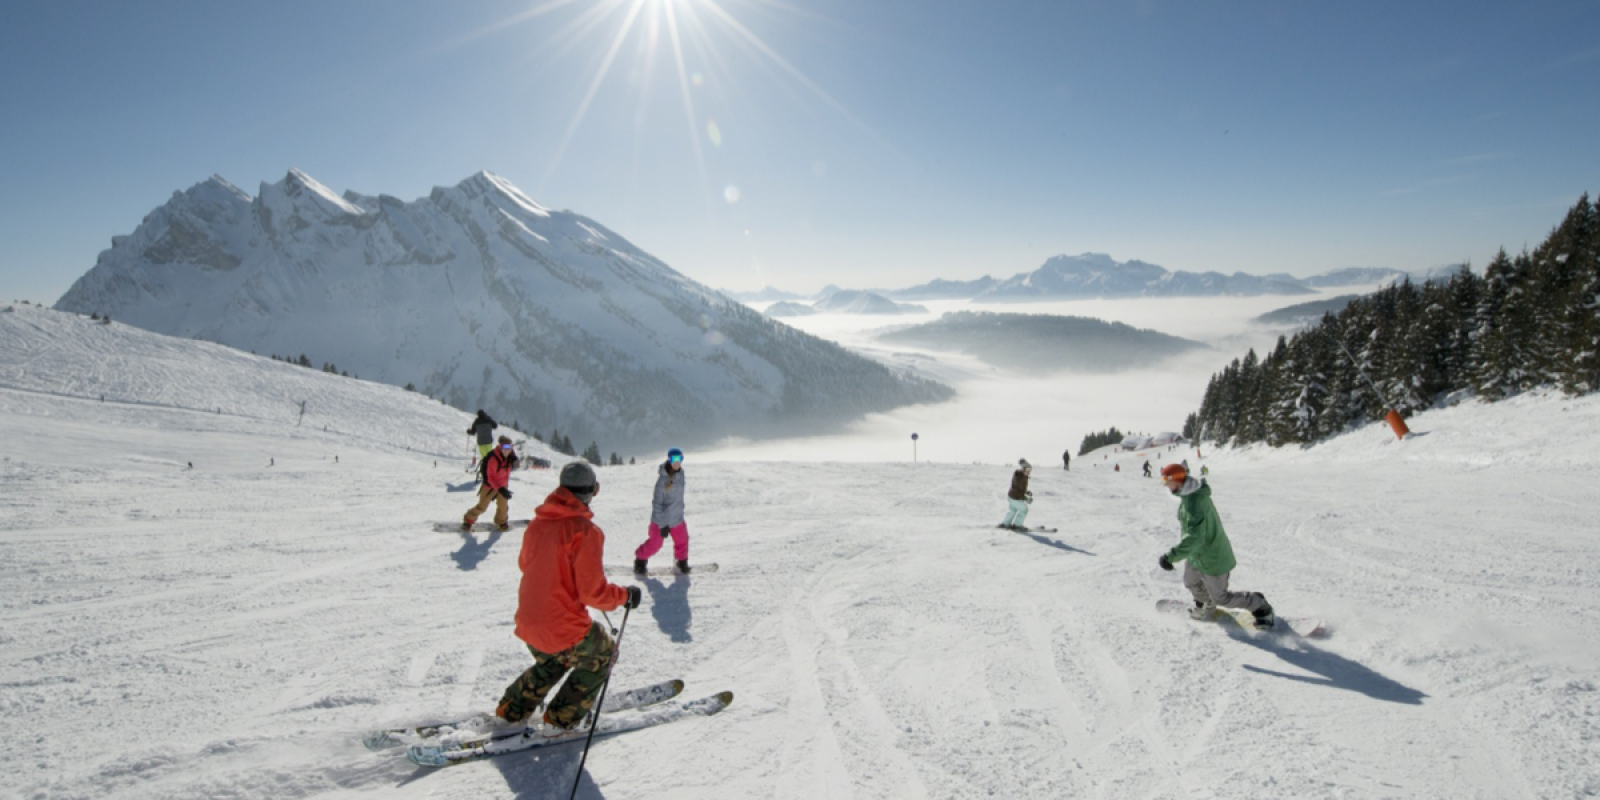 How To Plan A Group Ski Holiday